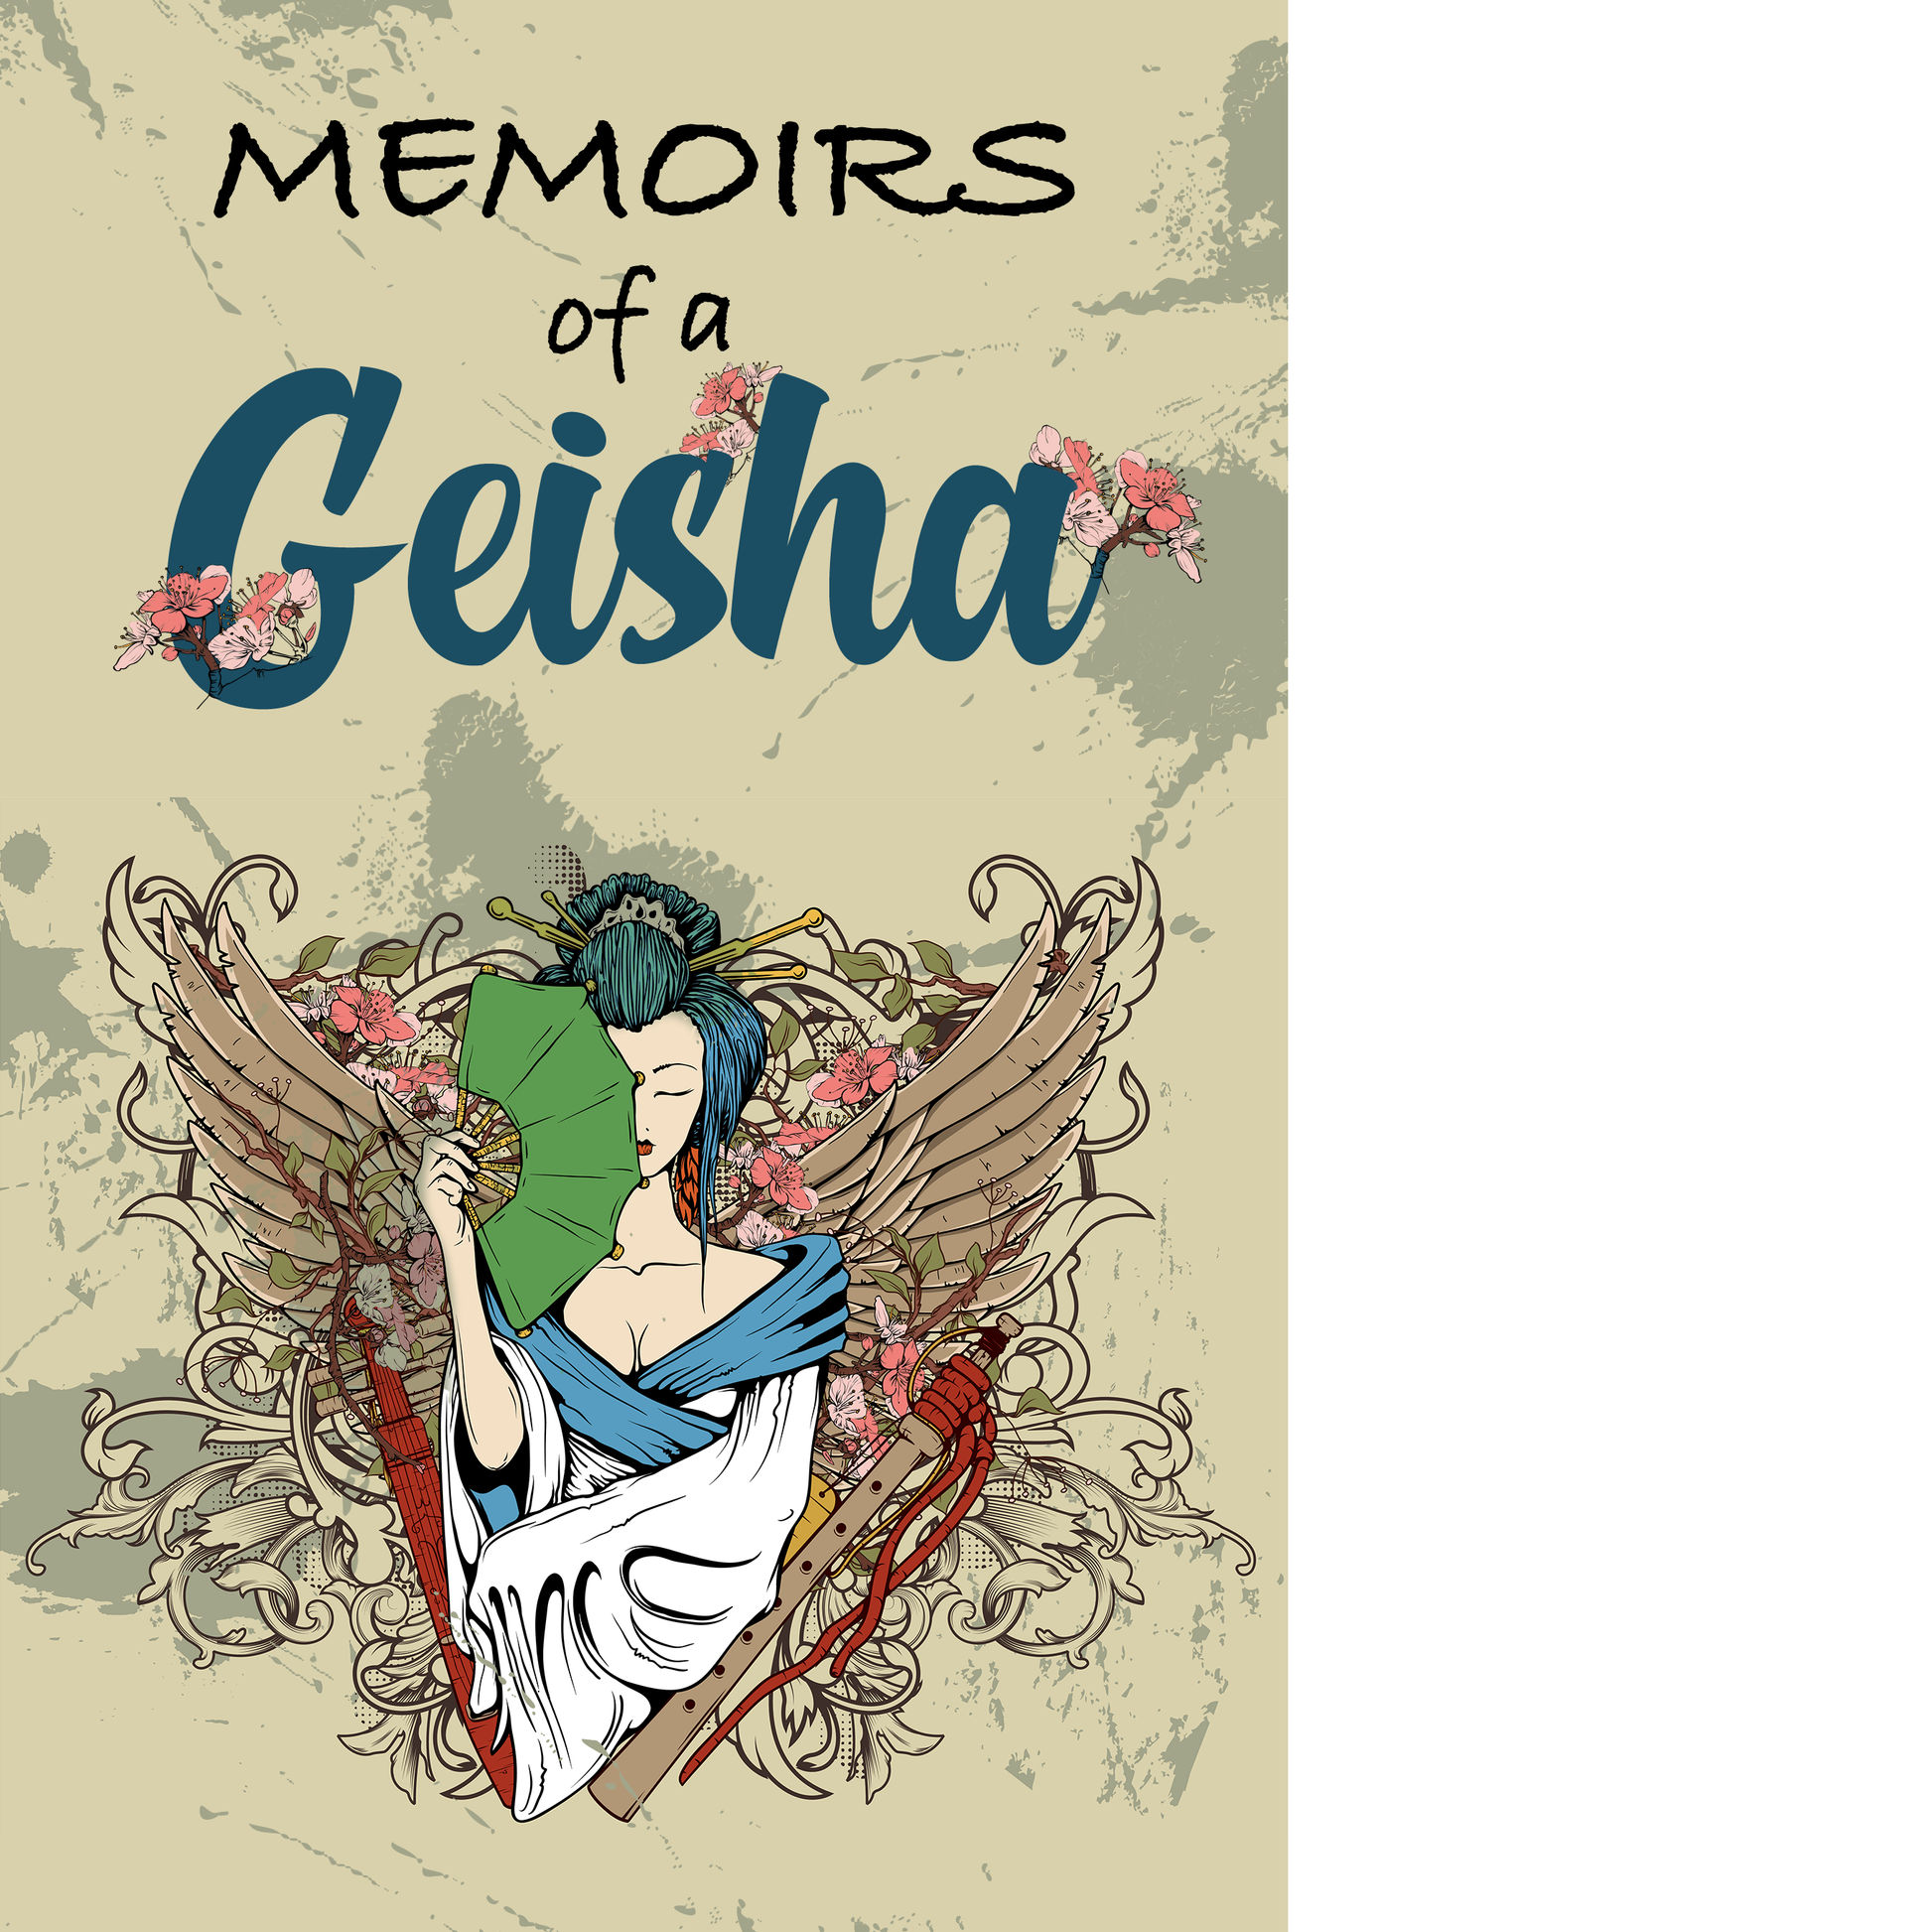 Memoirs of a Geisha (8 Players, Ships Jan. 2022) | Taisho Era was the shortest modern era of Japan. It was peaceful, romantic and prosperous. The beautiful geisha living in the Gion district of Kyoto were famous for their dance and singing.